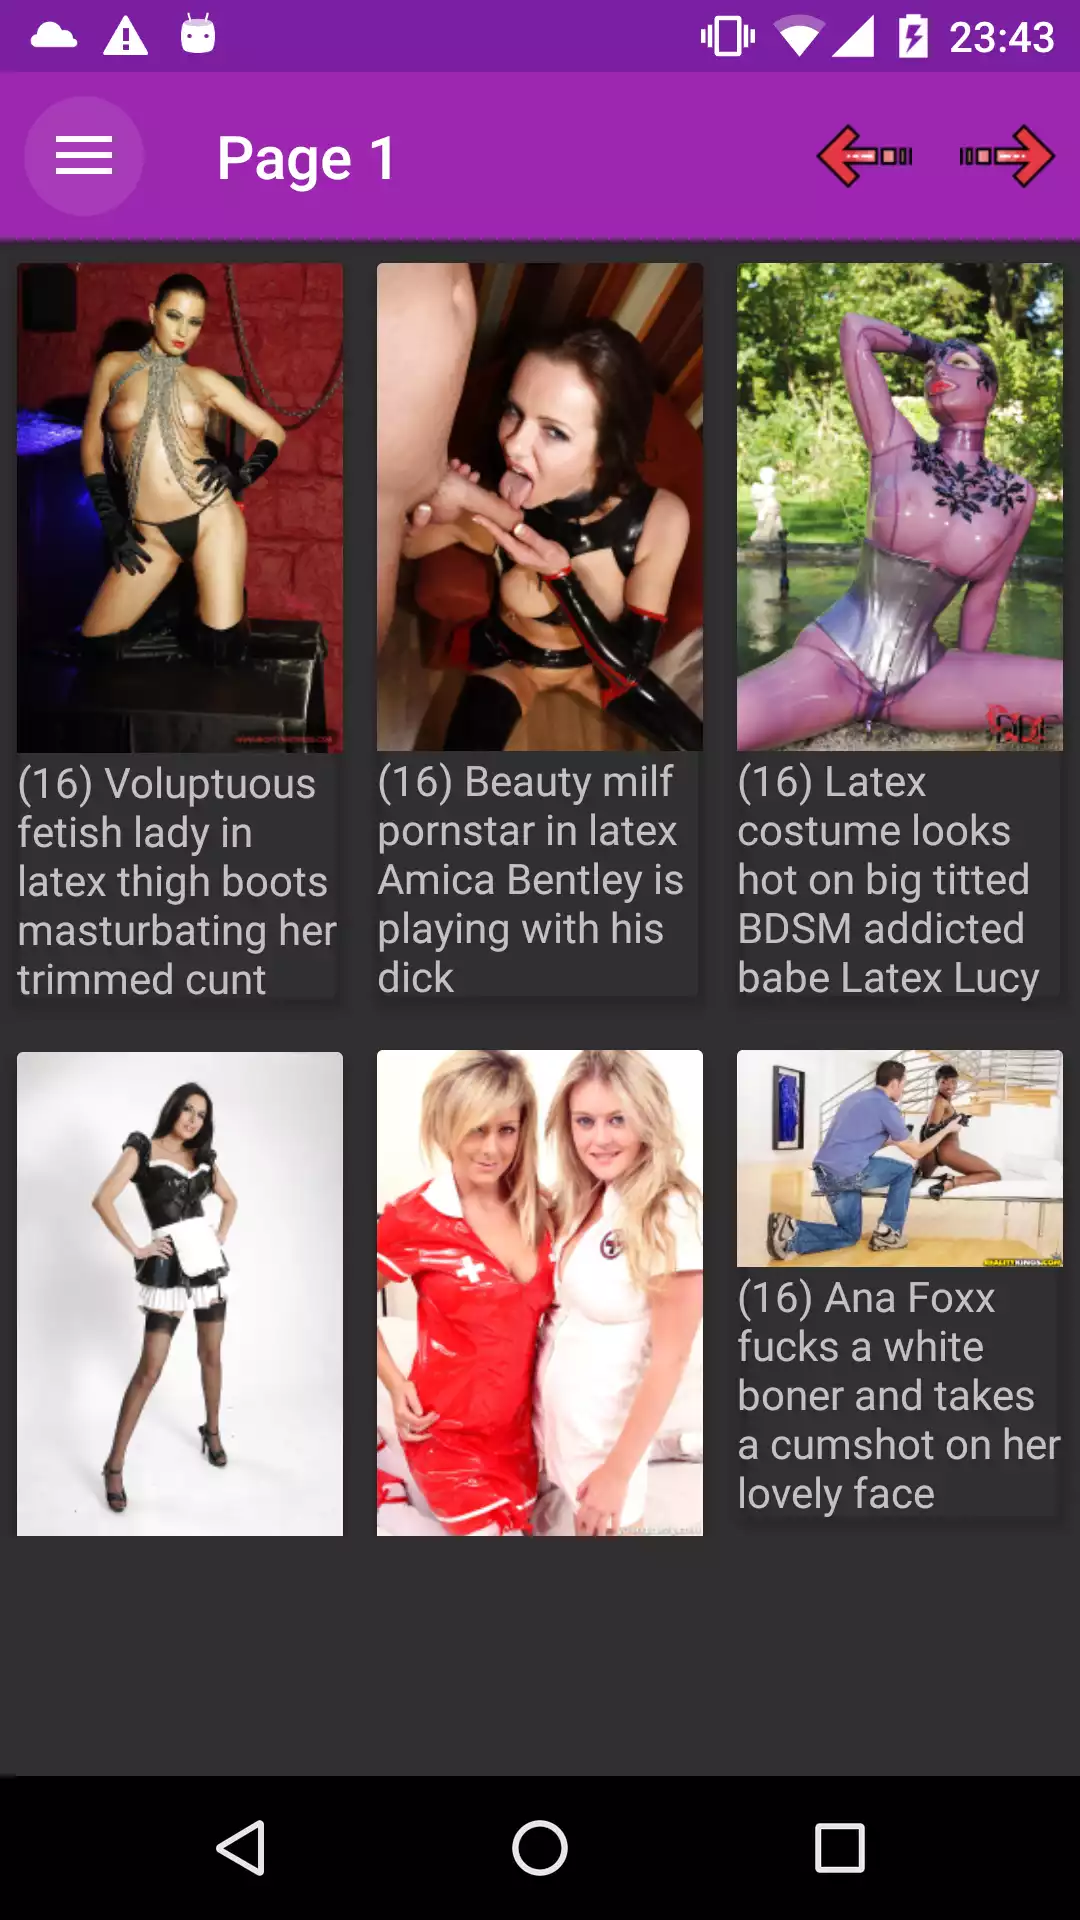 Latex galleries app,the,download,porn,pics,photos,wallpapers,wallpaper,jpg,topless,pic,adult,best,hentai,images,hot,new,sexy,apk,galleries,offline